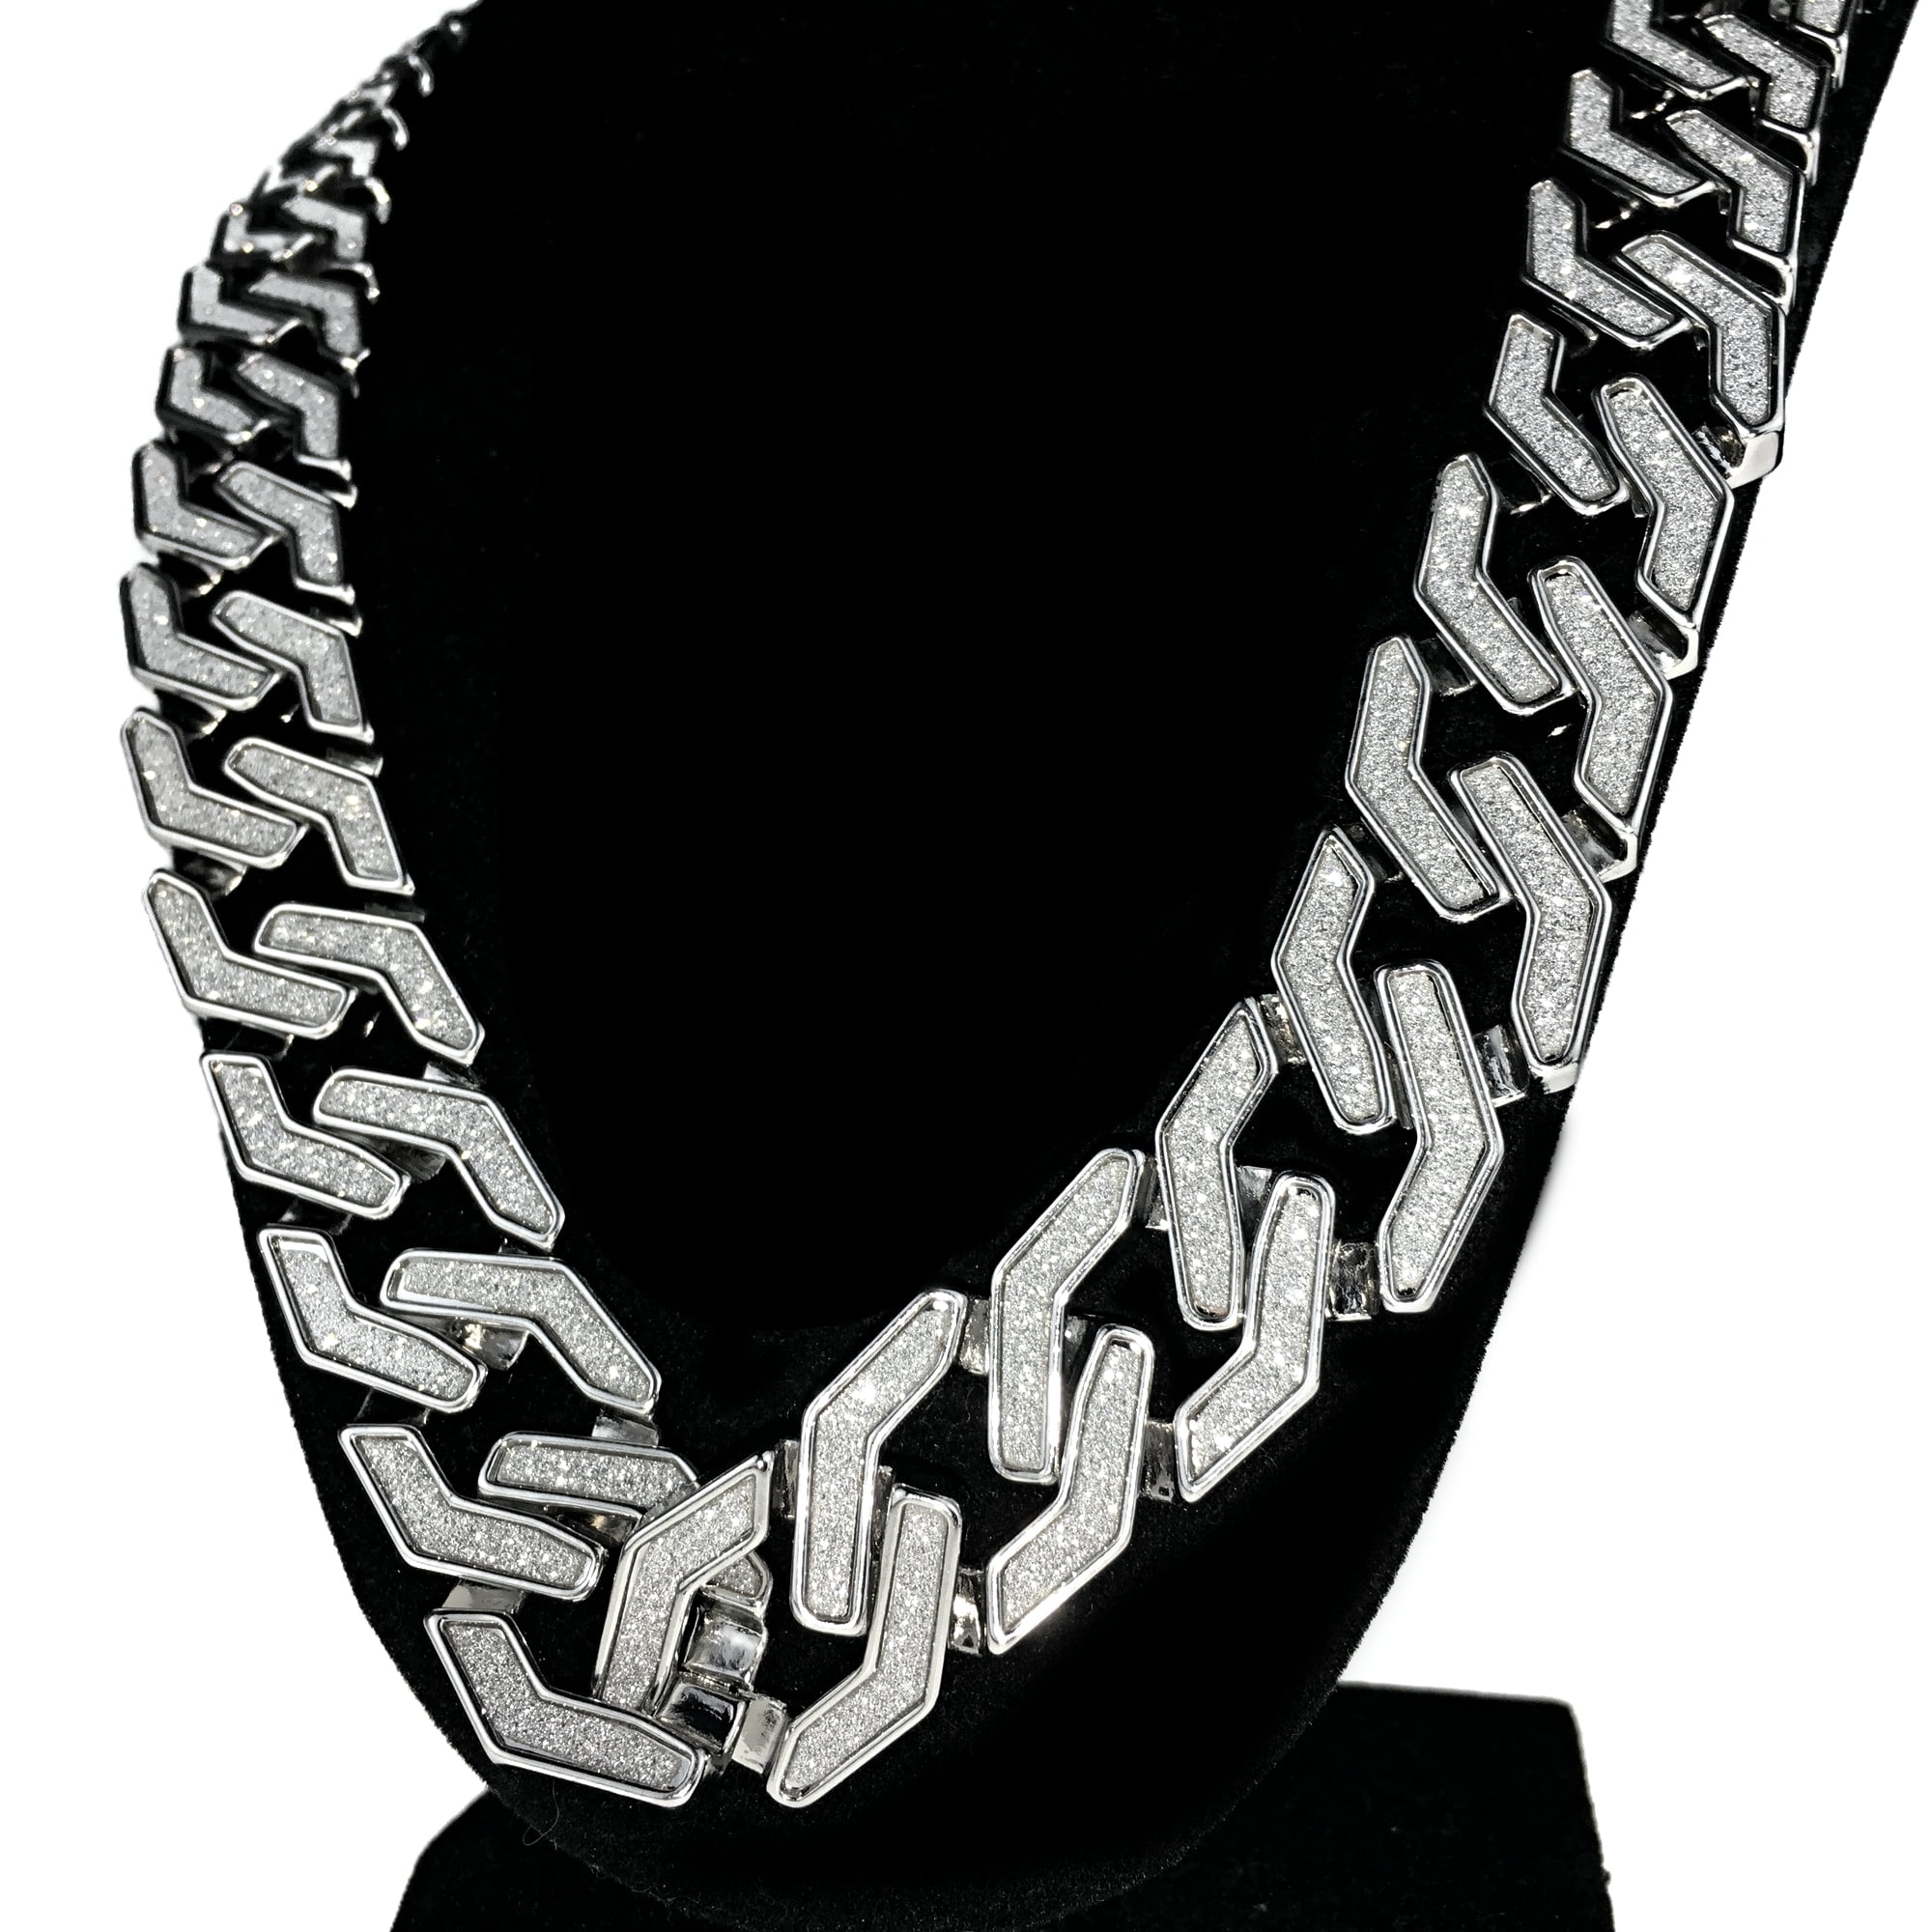 20mm Iced Square Miami Cuban Link Chain Silver Plated Hip Hop Jewelry Necklace